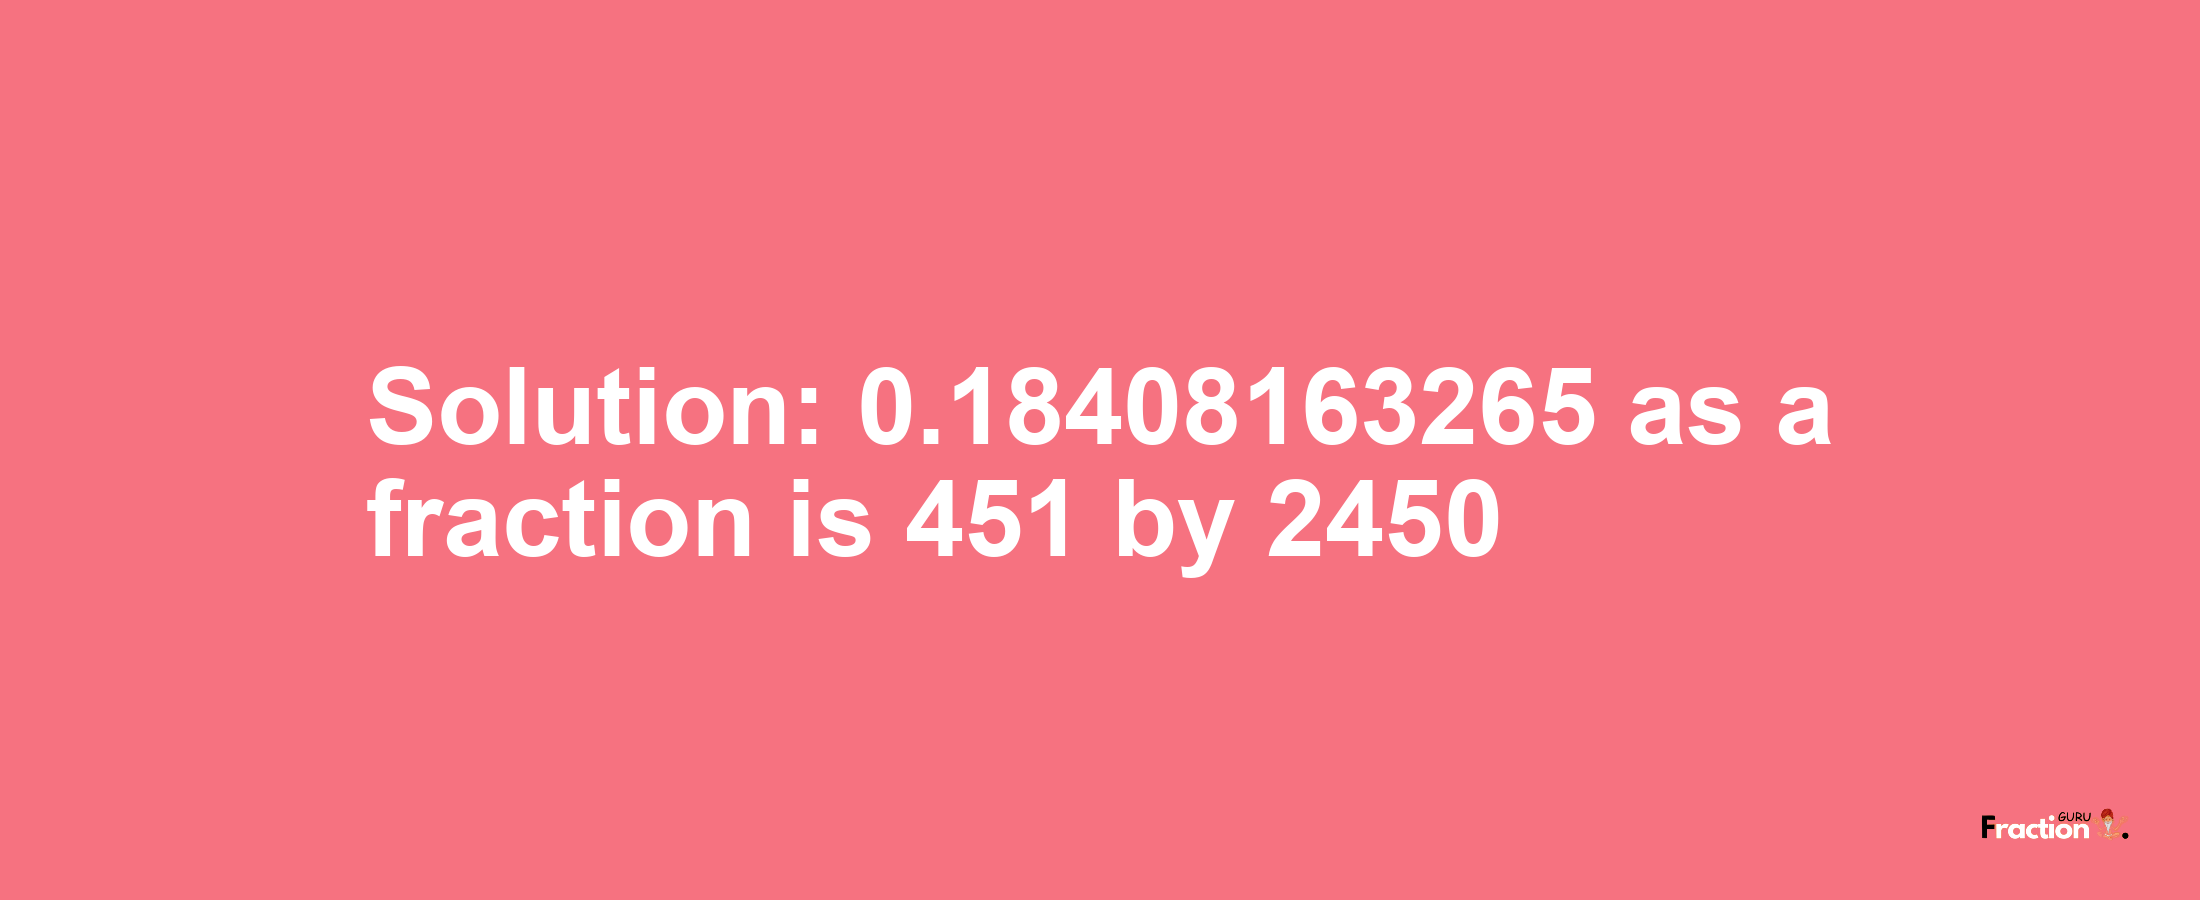 Solution:0.18408163265 as a fraction is 451/2450